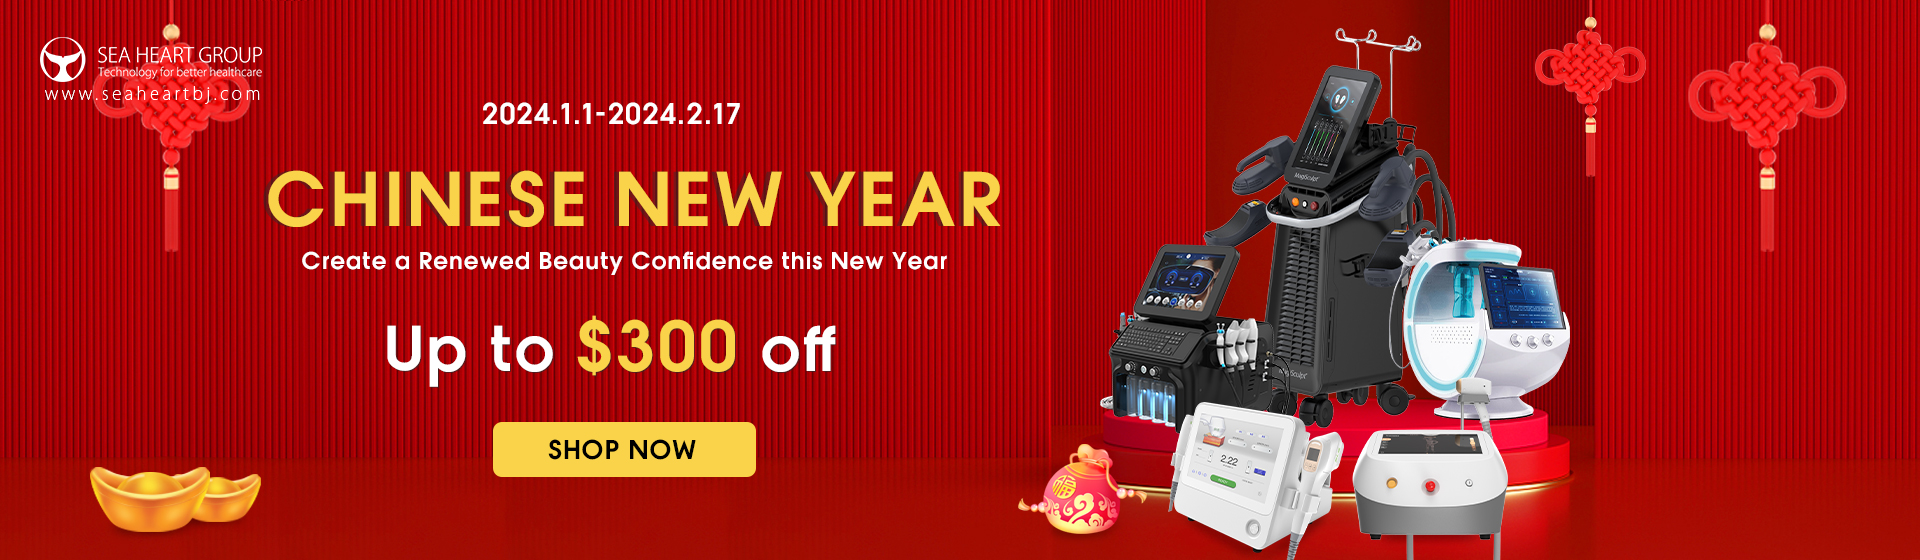 Chinese new year promotion